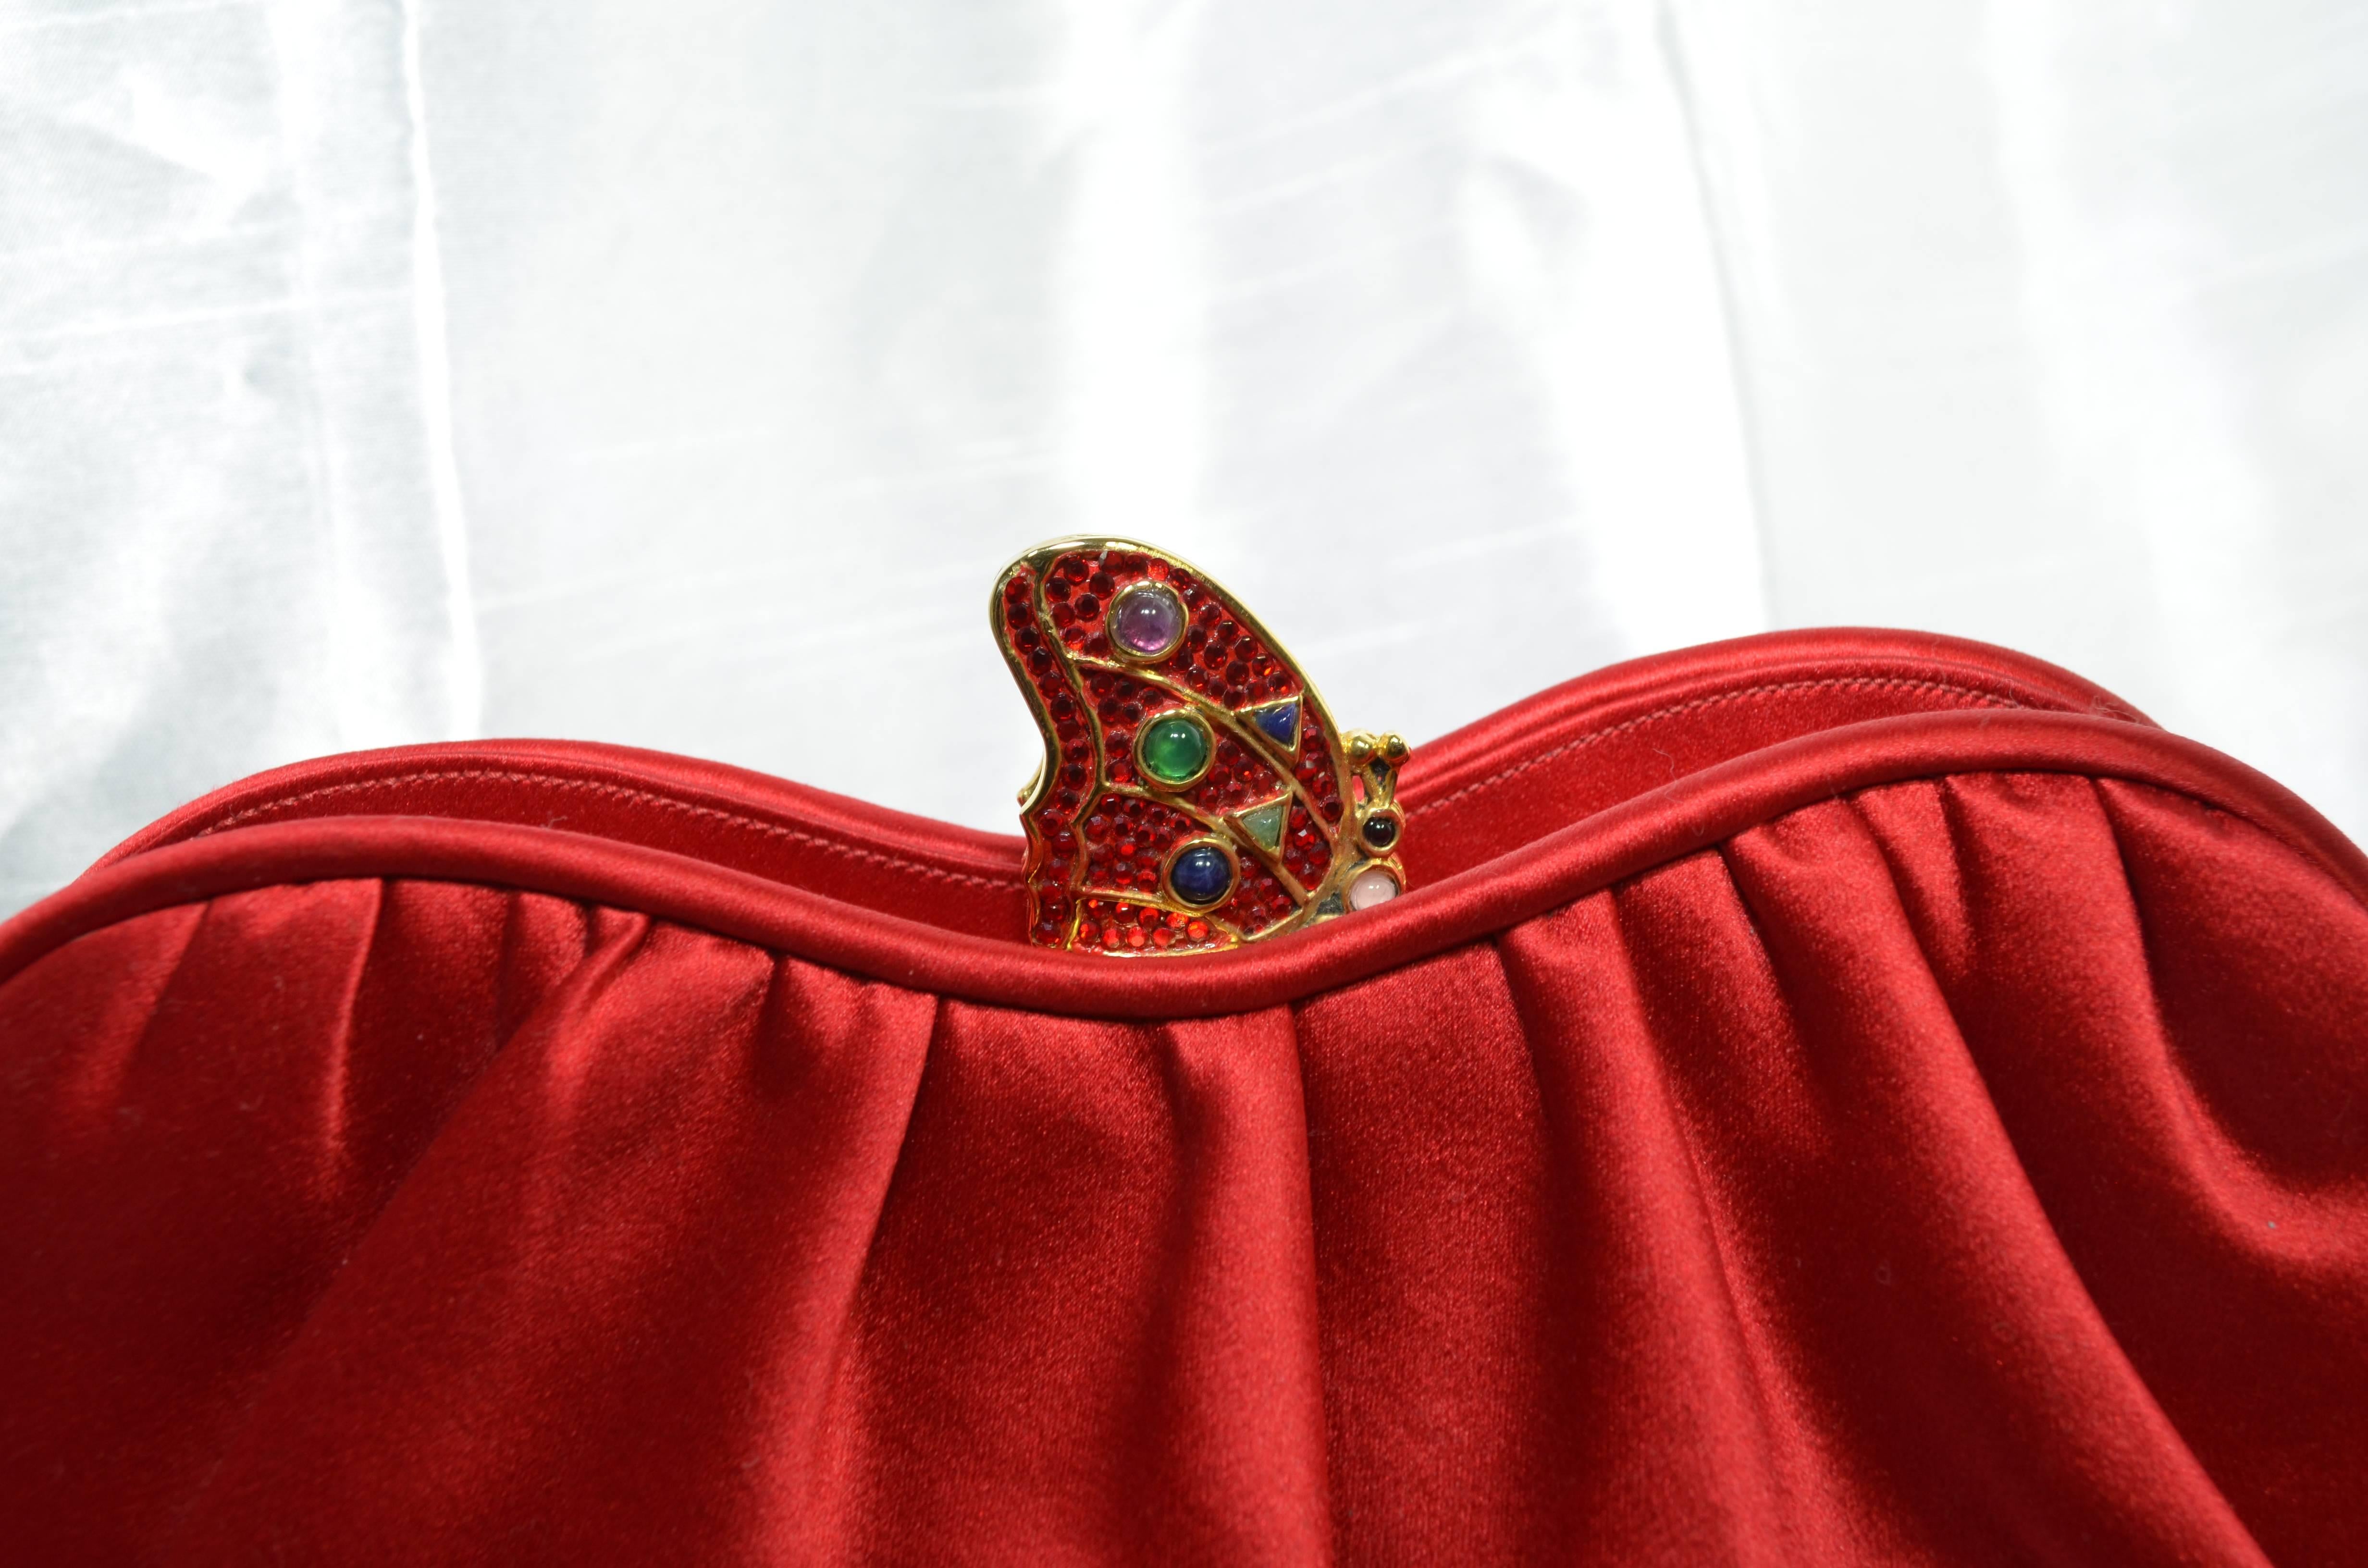 Red Judith Leiber Satin Clutch with Butterfly Closure